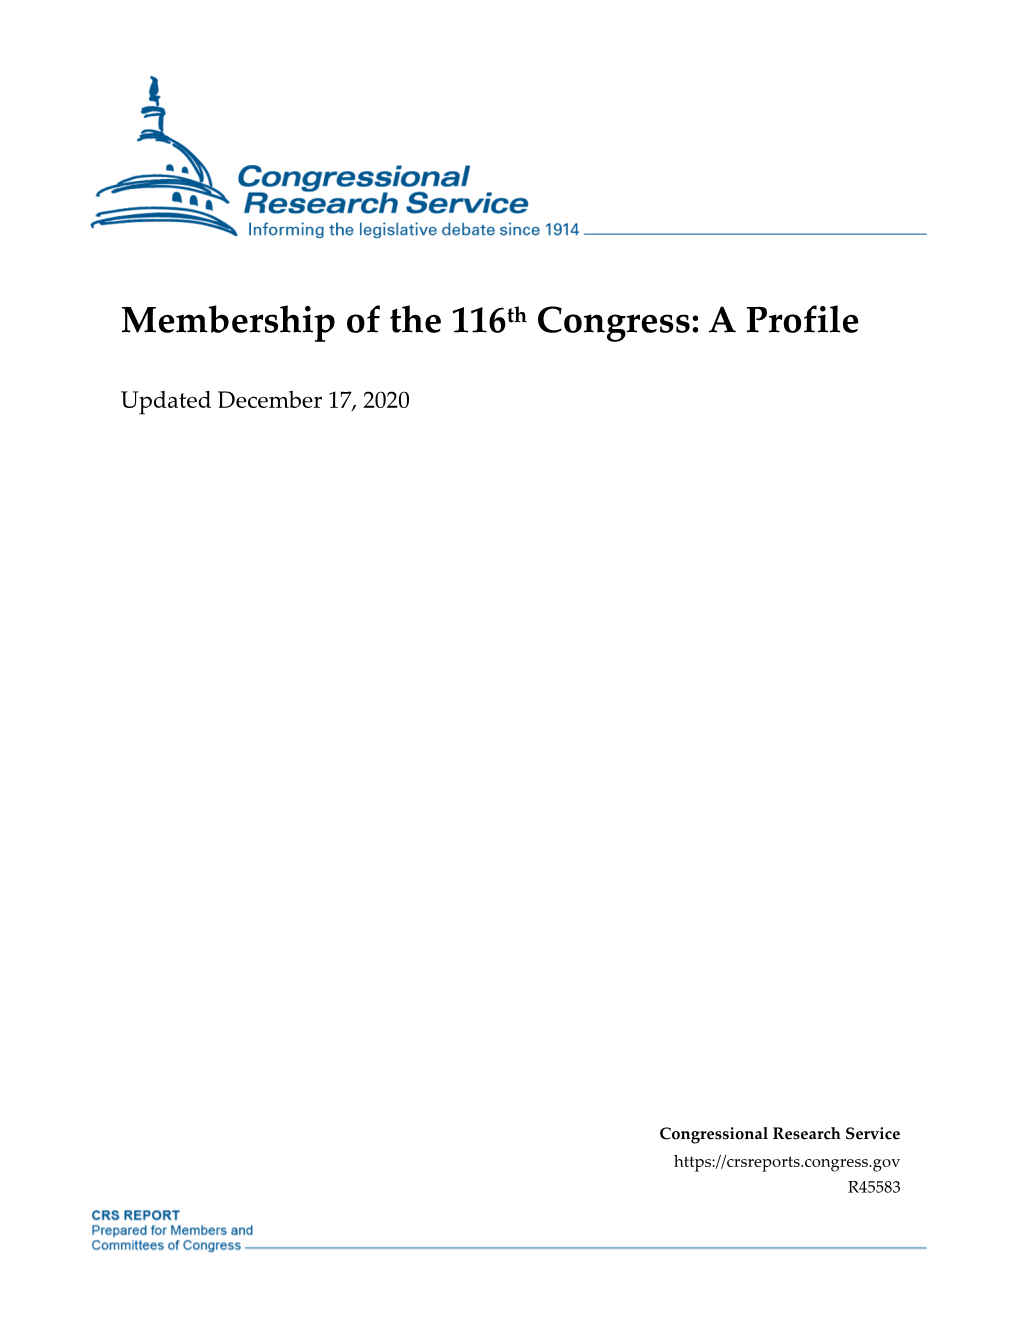 Membership of the 116Th Congress: a Profile